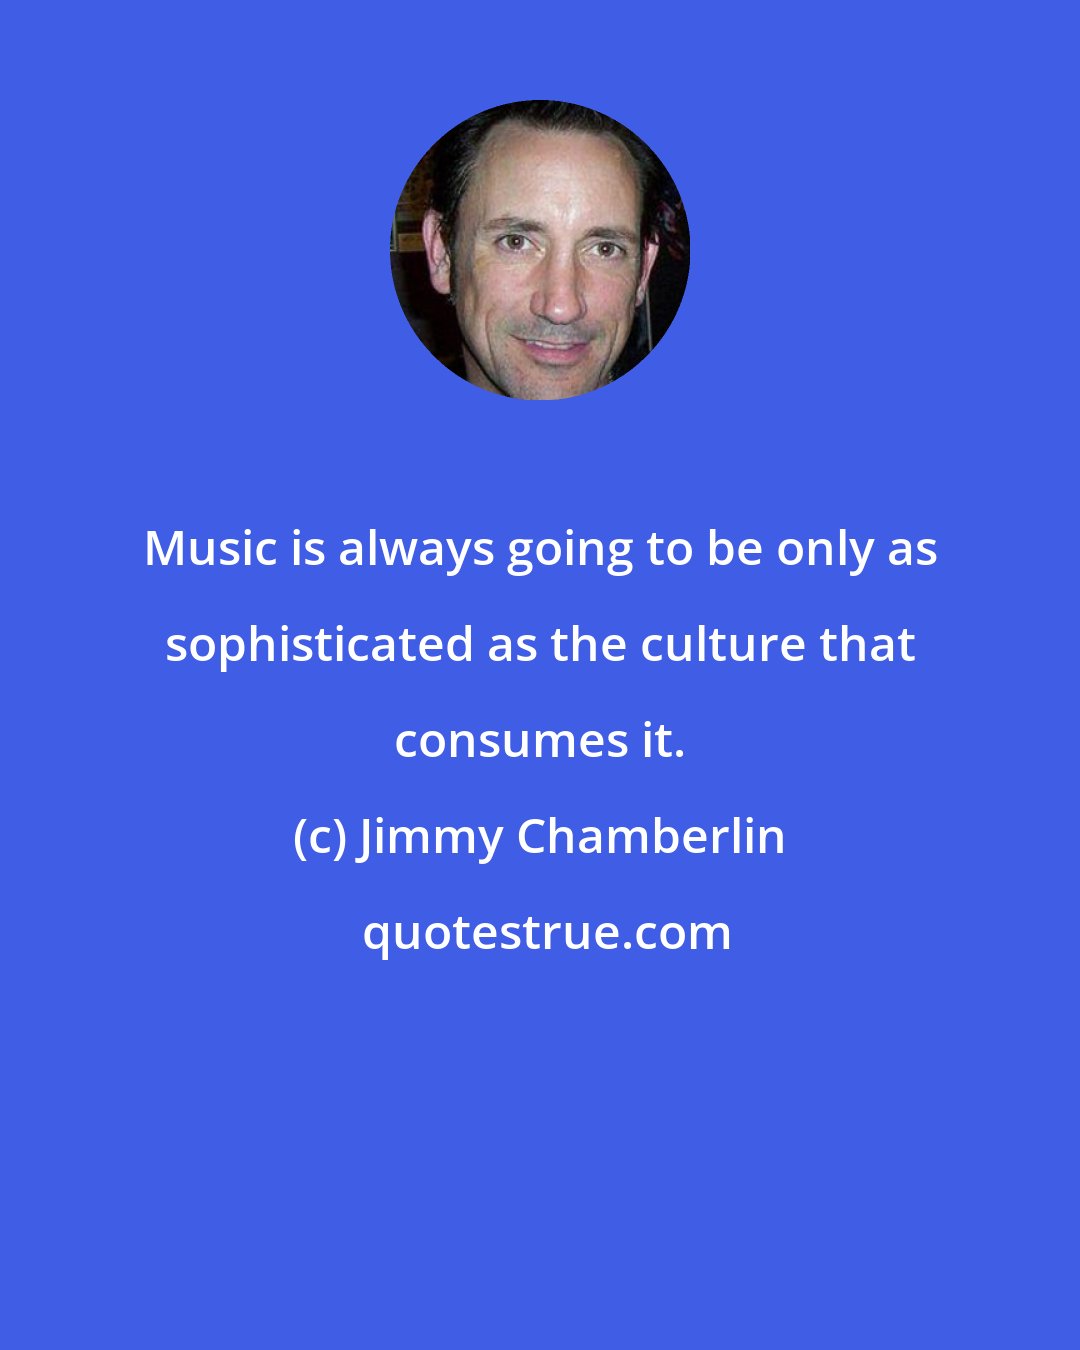 Jimmy Chamberlin: Music is always going to be only as sophisticated as the culture that consumes it.